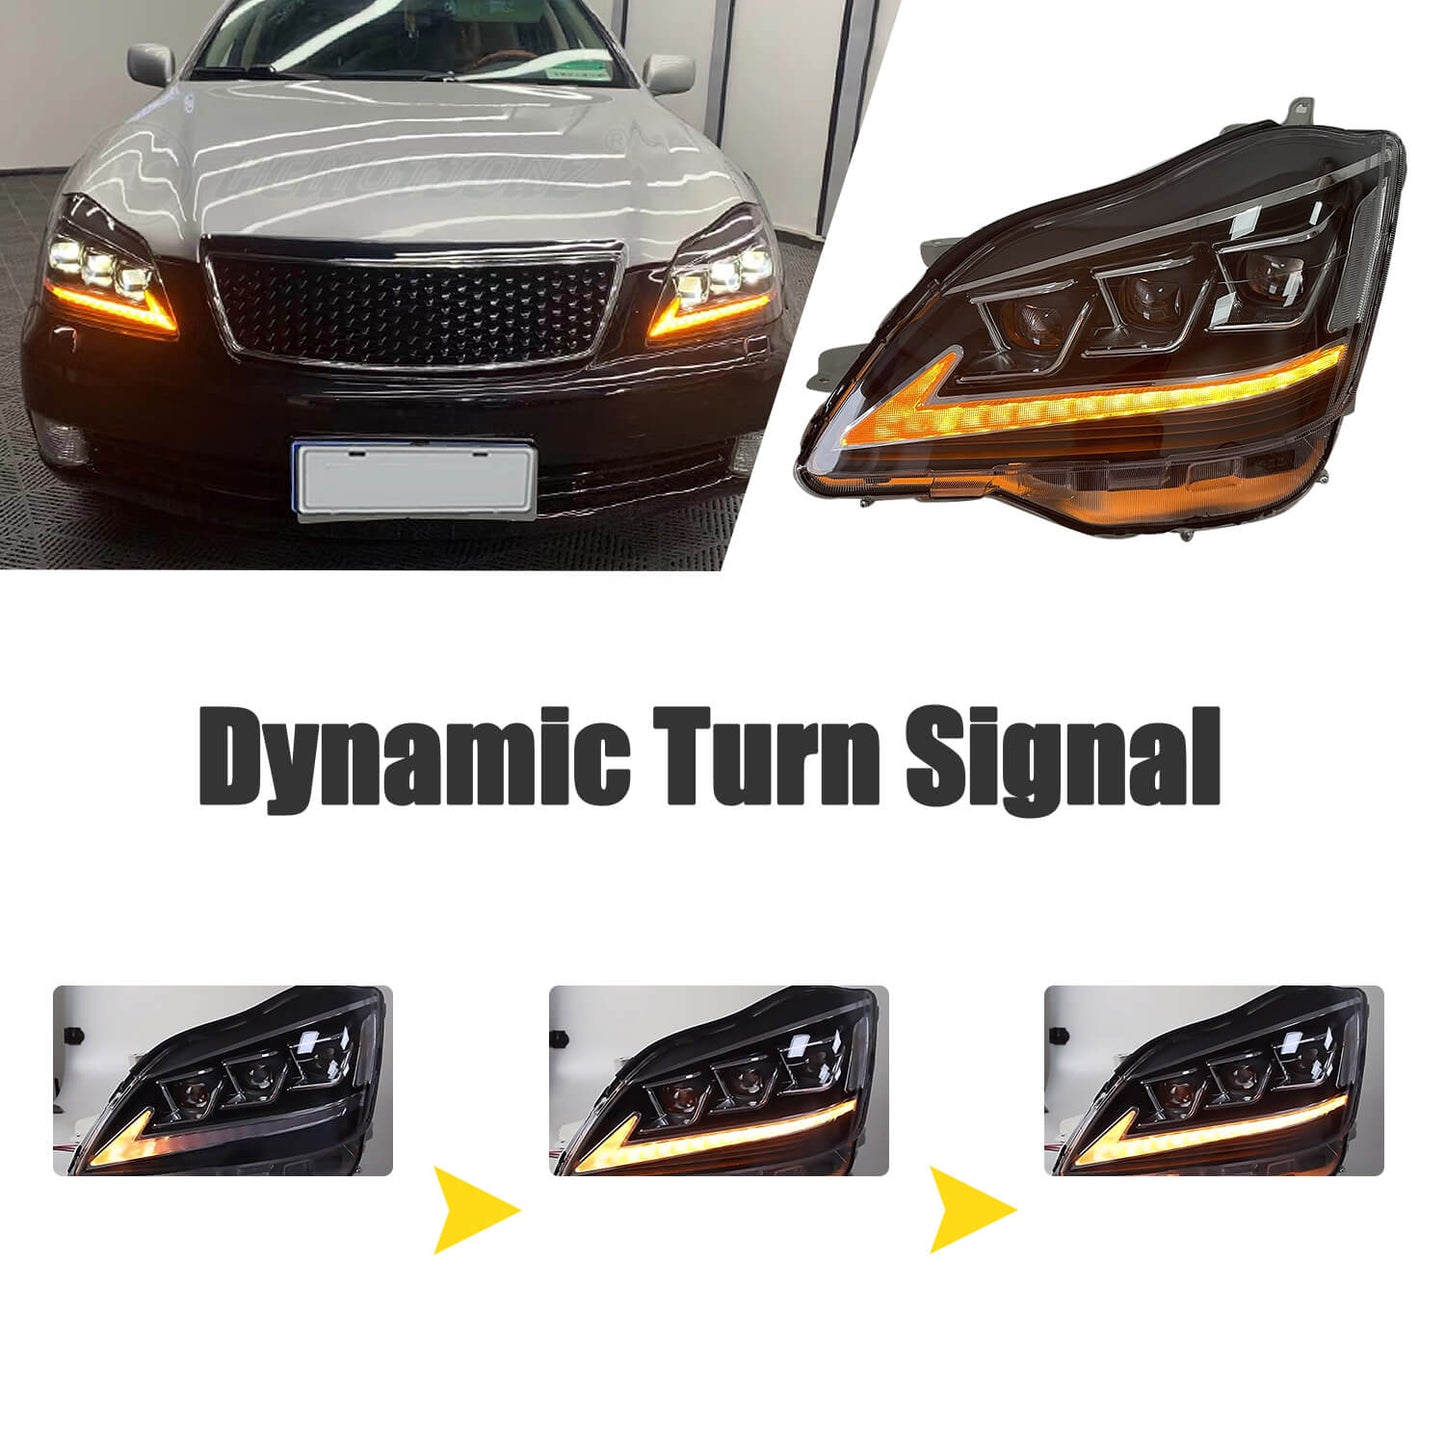 HCMOTION LED Headlights For Toyota Crown 2003-2008